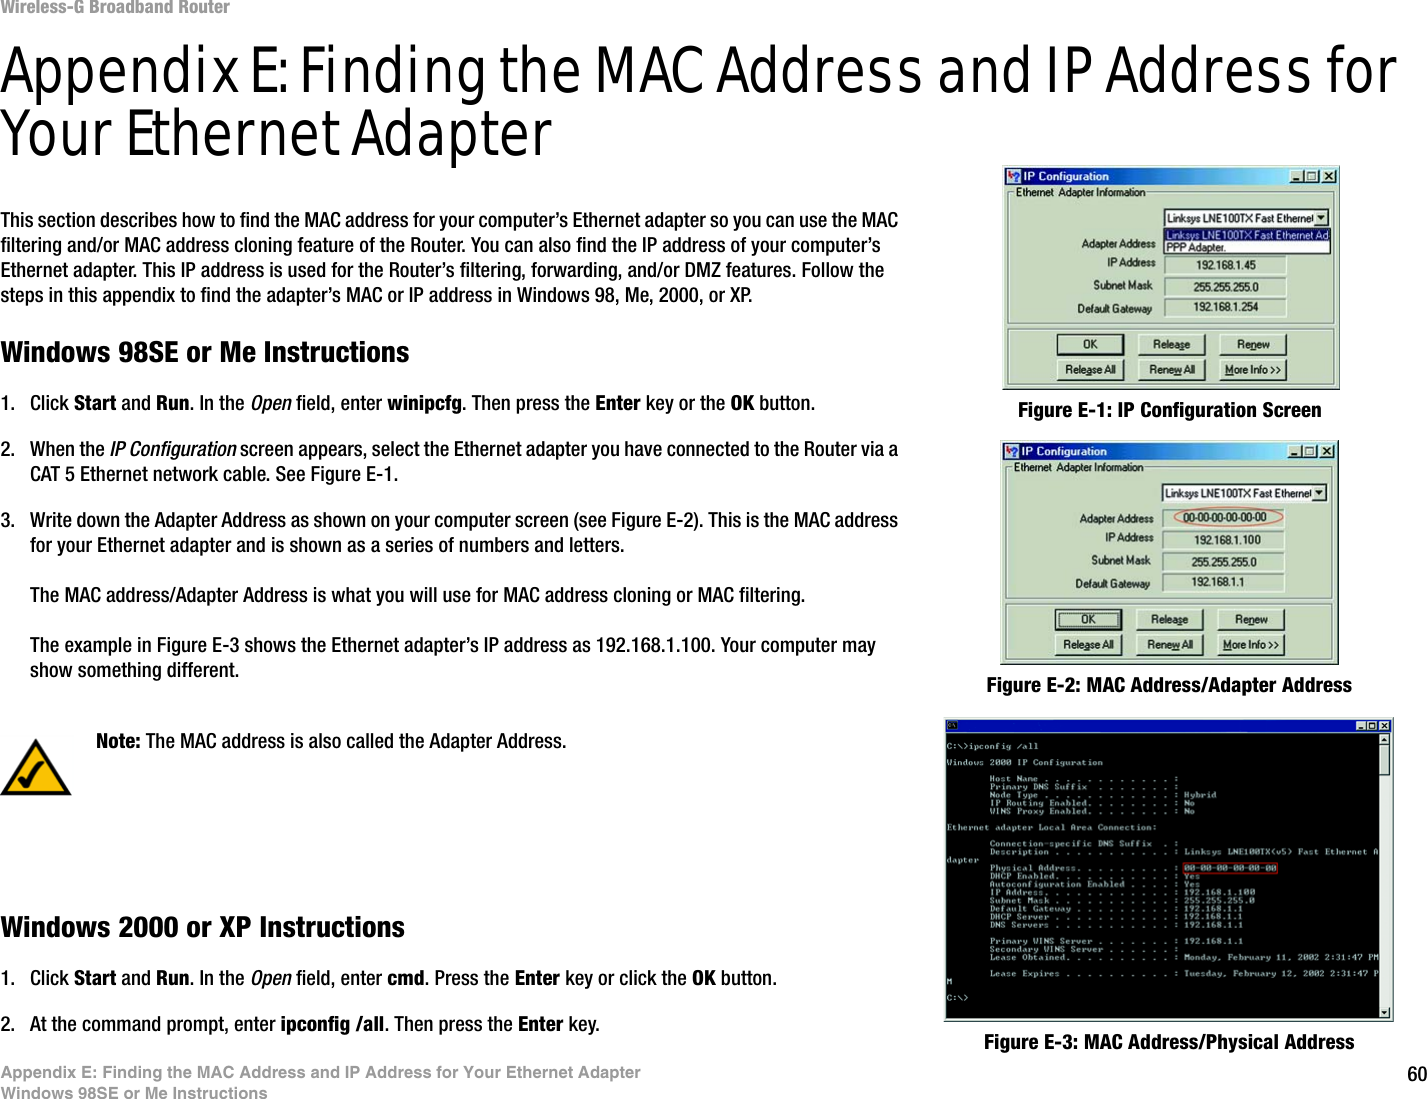 60Appendix E: Finding the MAC Address and IP Address for Your Ethernet AdapterWindows 98SE or Me InstructionsWireless-G Broadband RouterAppendix E: Finding the MAC Address and IP Address for Your Ethernet AdapterThis section describes how to find the MAC address for your computer’s Ethernet adapter so you can use the MAC filtering and/or MAC address cloning feature of the Router. You can also find the IP address of your computer’s Ethernet adapter. This IP address is used for the Router’s filtering, forwarding, and/or DMZ features. Follow the steps in this appendix to find the adapter’s MAC or IP address in Windows 98, Me, 2000, or XP.Windows 98SE or Me Instructions1. Click Start and Run. In the Open field, enter winipcfg. Then press the Enter key or the OK button. 2. When the IP Configuration screen appears, select the Ethernet adapter you have connected to the Router via a CAT 5 Ethernet network cable. See Figure E-1.3. Write down the Adapter Address as shown on your computer screen (see Figure E-2). This is the MAC address for your Ethernet adapter and is shown as a series of numbers and letters.The MAC address/Adapter Address is what you will use for MAC address cloning or MAC filtering.The example in Figure E-3 shows the Ethernet adapter’s IP address as 192.168.1.100. Your computer may show something different.Windows 2000 or XP Instructions1. Click Start and Run. In the Open field, enter cmd. Press the Enter key or click the OK button.2. At the command prompt, enter ipconfig /all. Then press the Enter key.Figure E-2: MAC Address/Adapter AddressFigure E-1: IP Configuration ScreenNote: The MAC address is also called the Adapter Address.Figure E-3: MAC Address/Physical Address